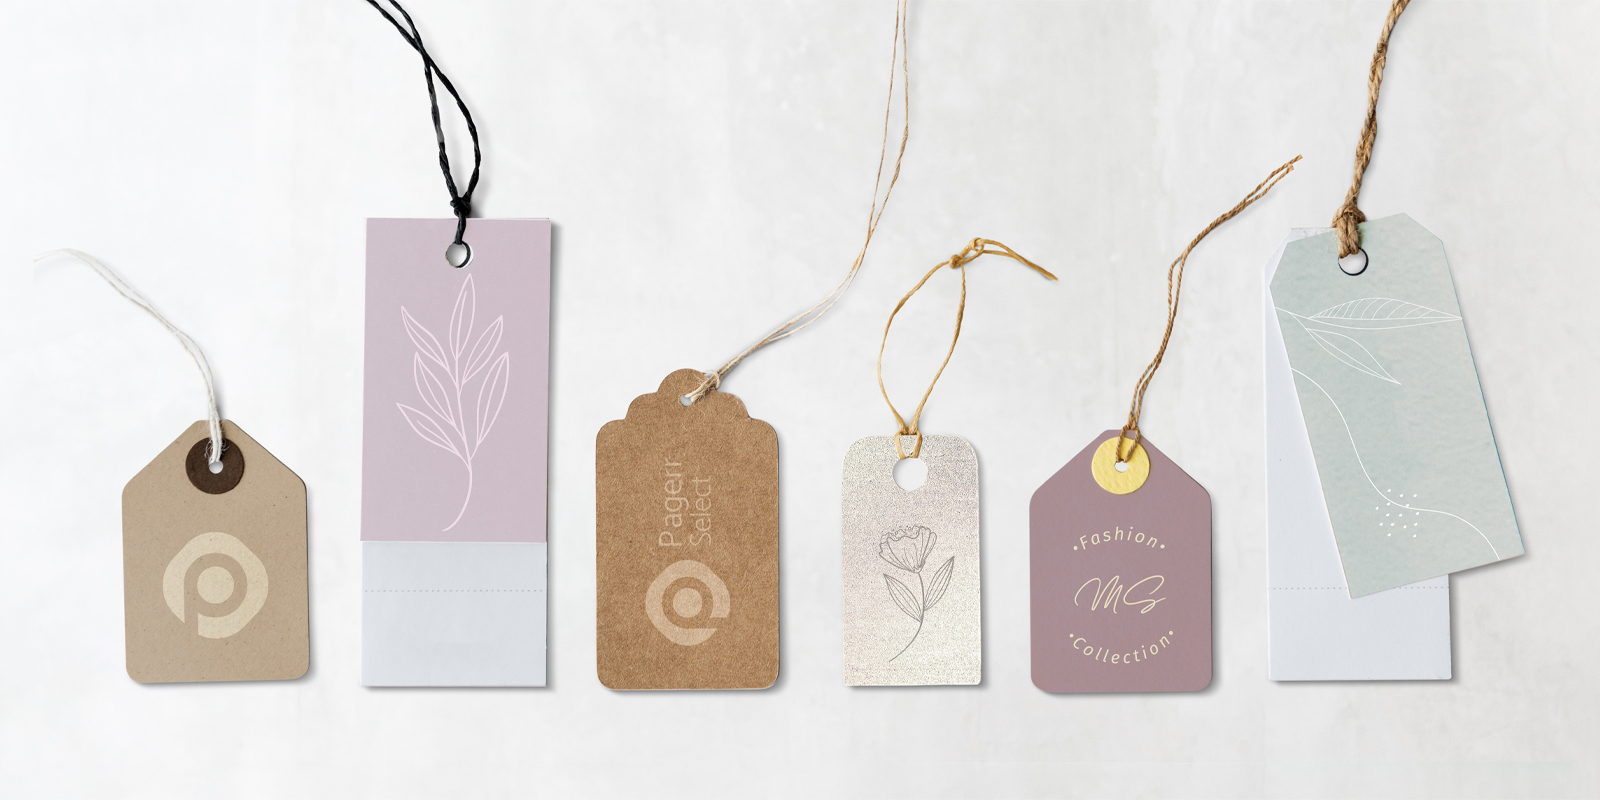 Product tags in Gold Coast - Print with Pagerr